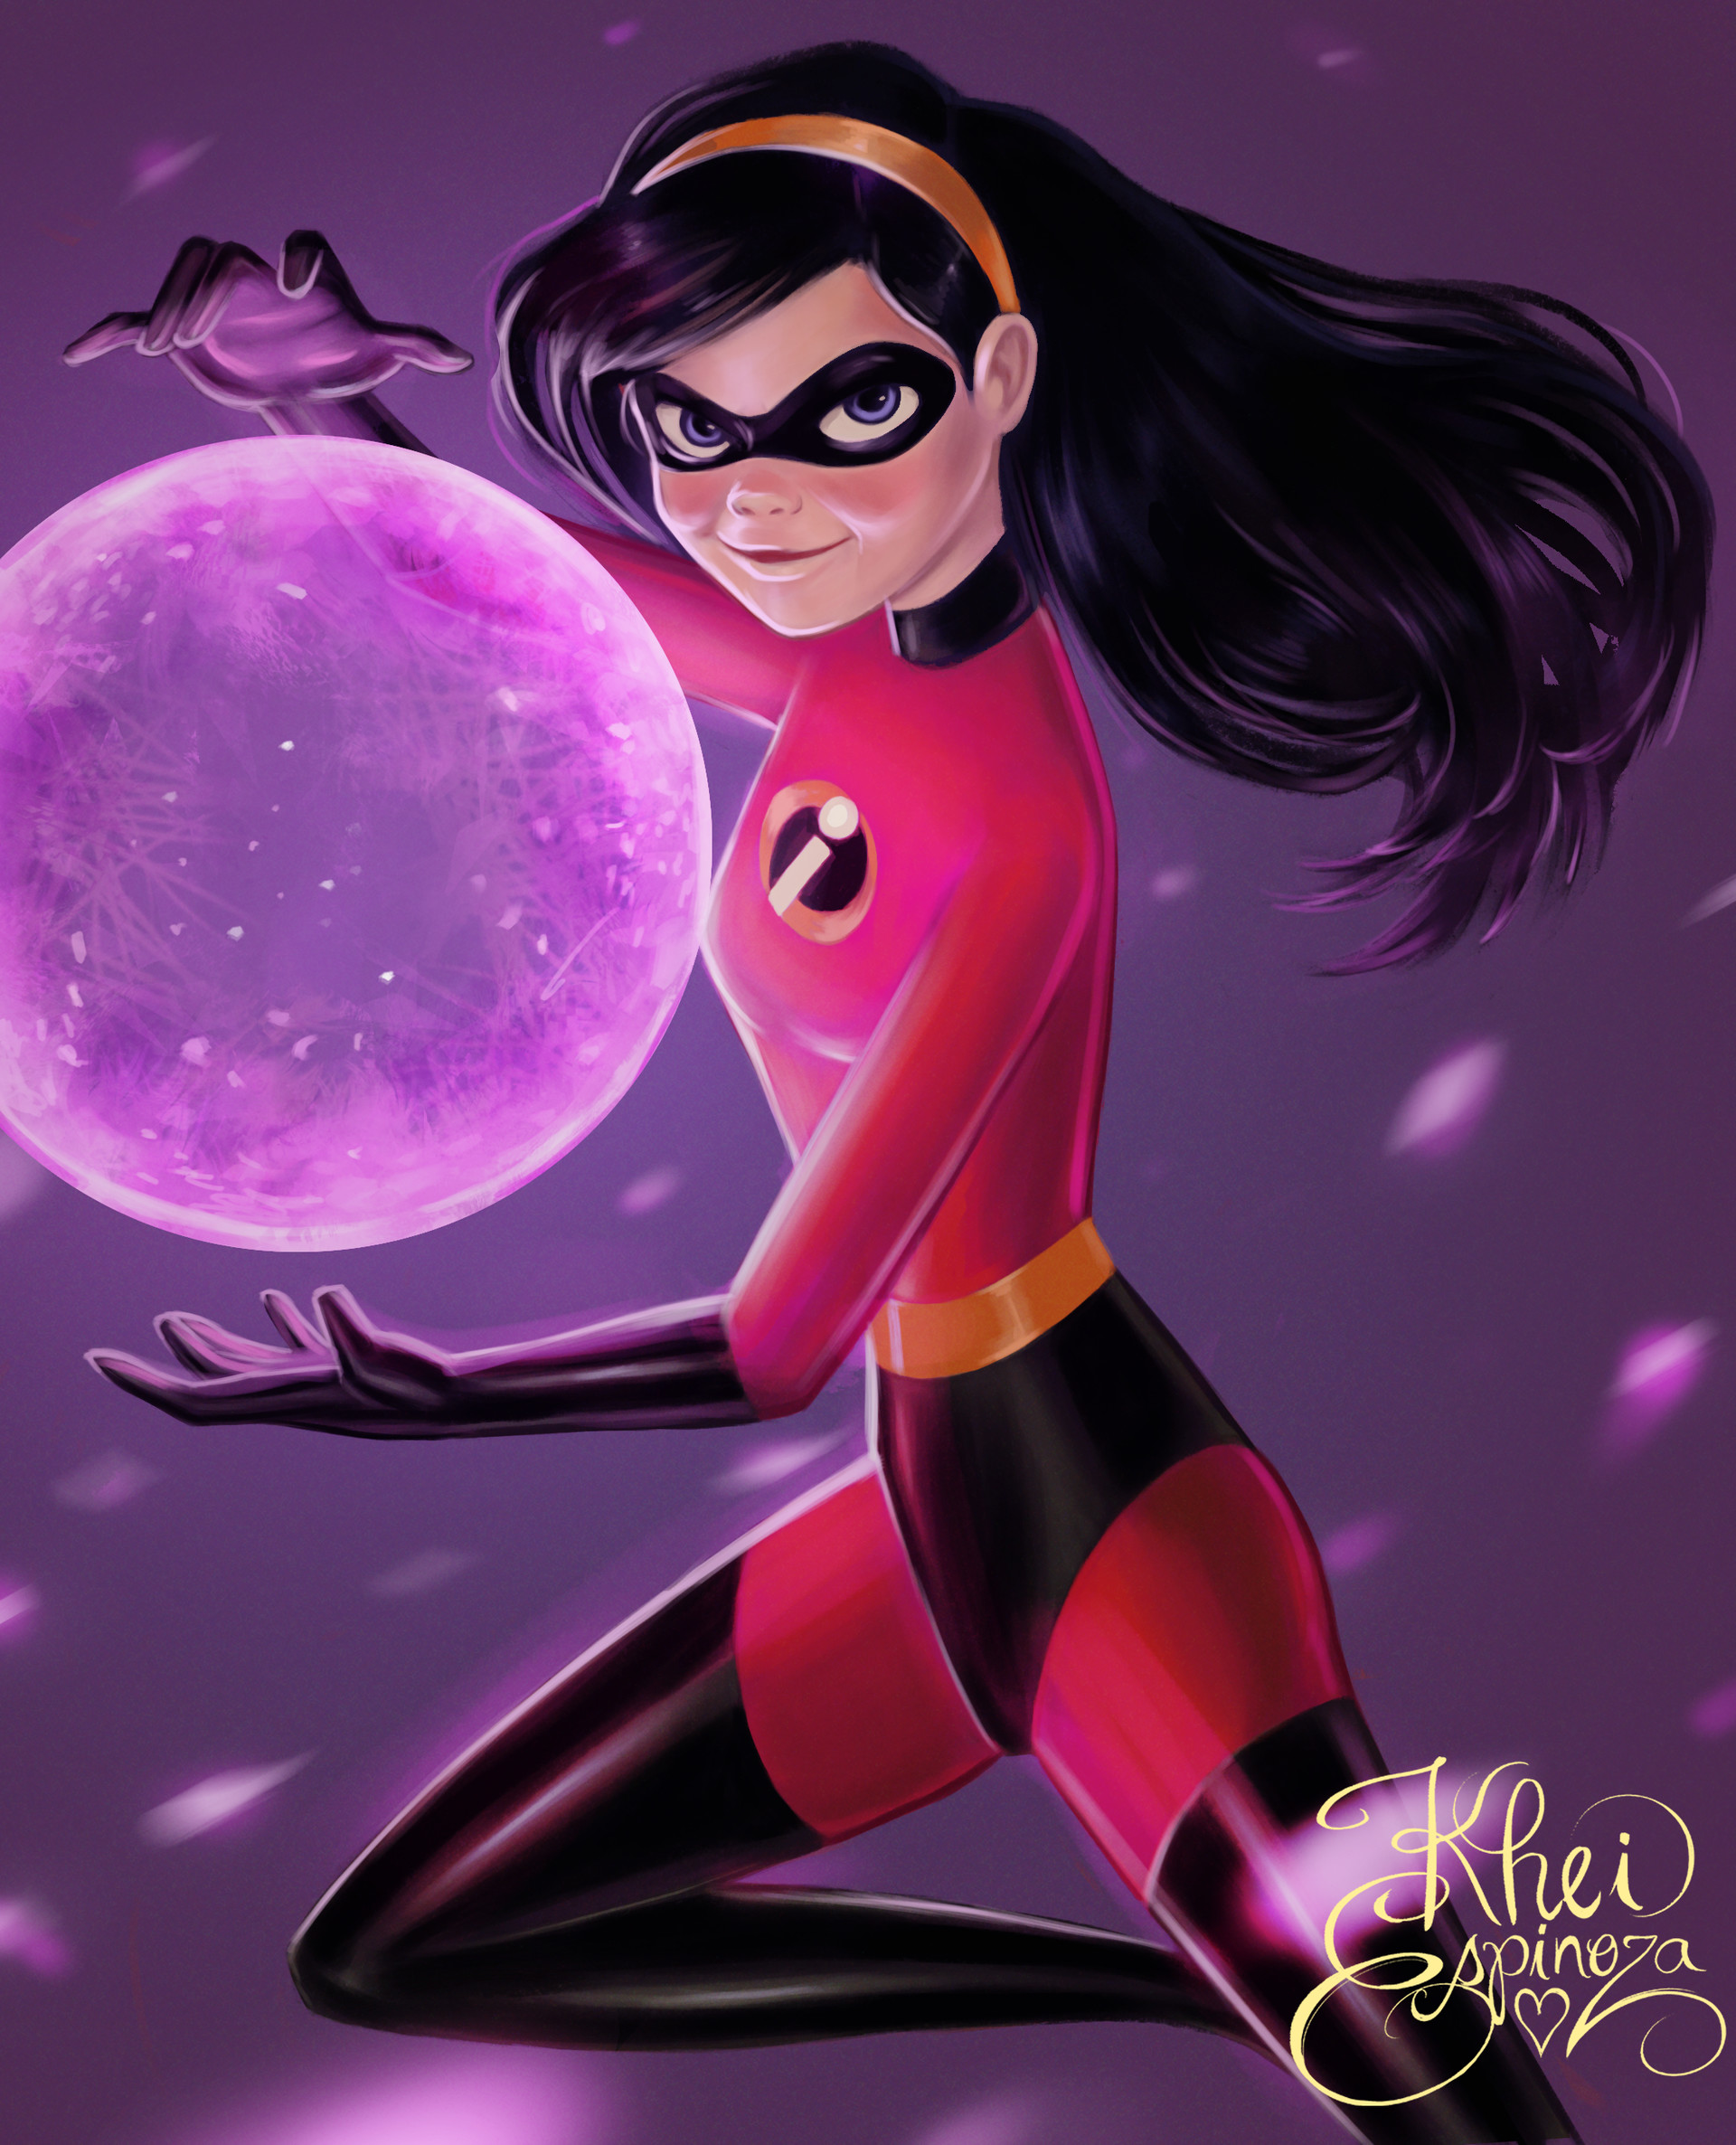 A fan art I made for Violet Parr of "The Incredibles"